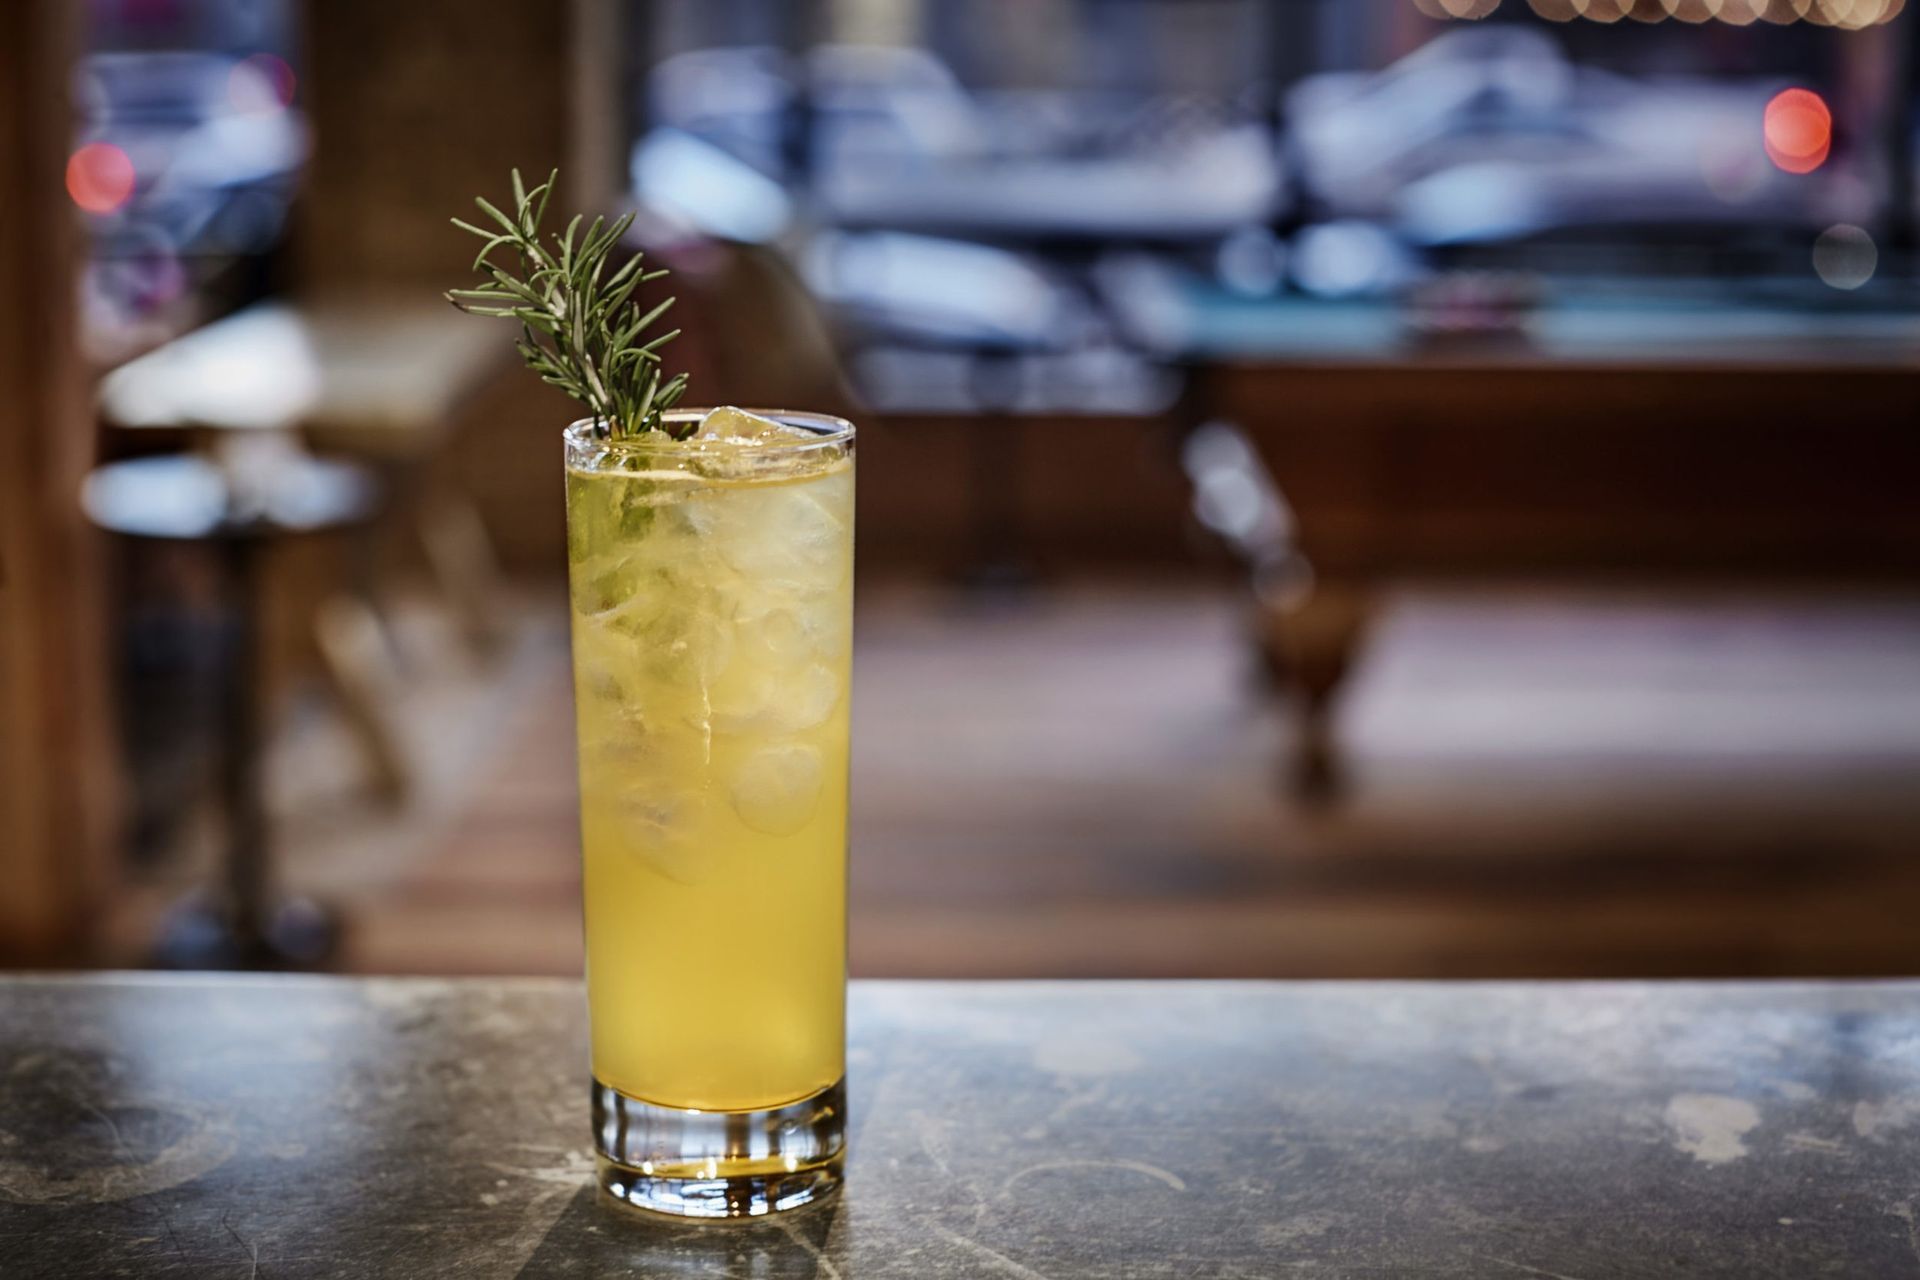 a tall glass filled with a yellow liquid and a sprig of rosemary on a table